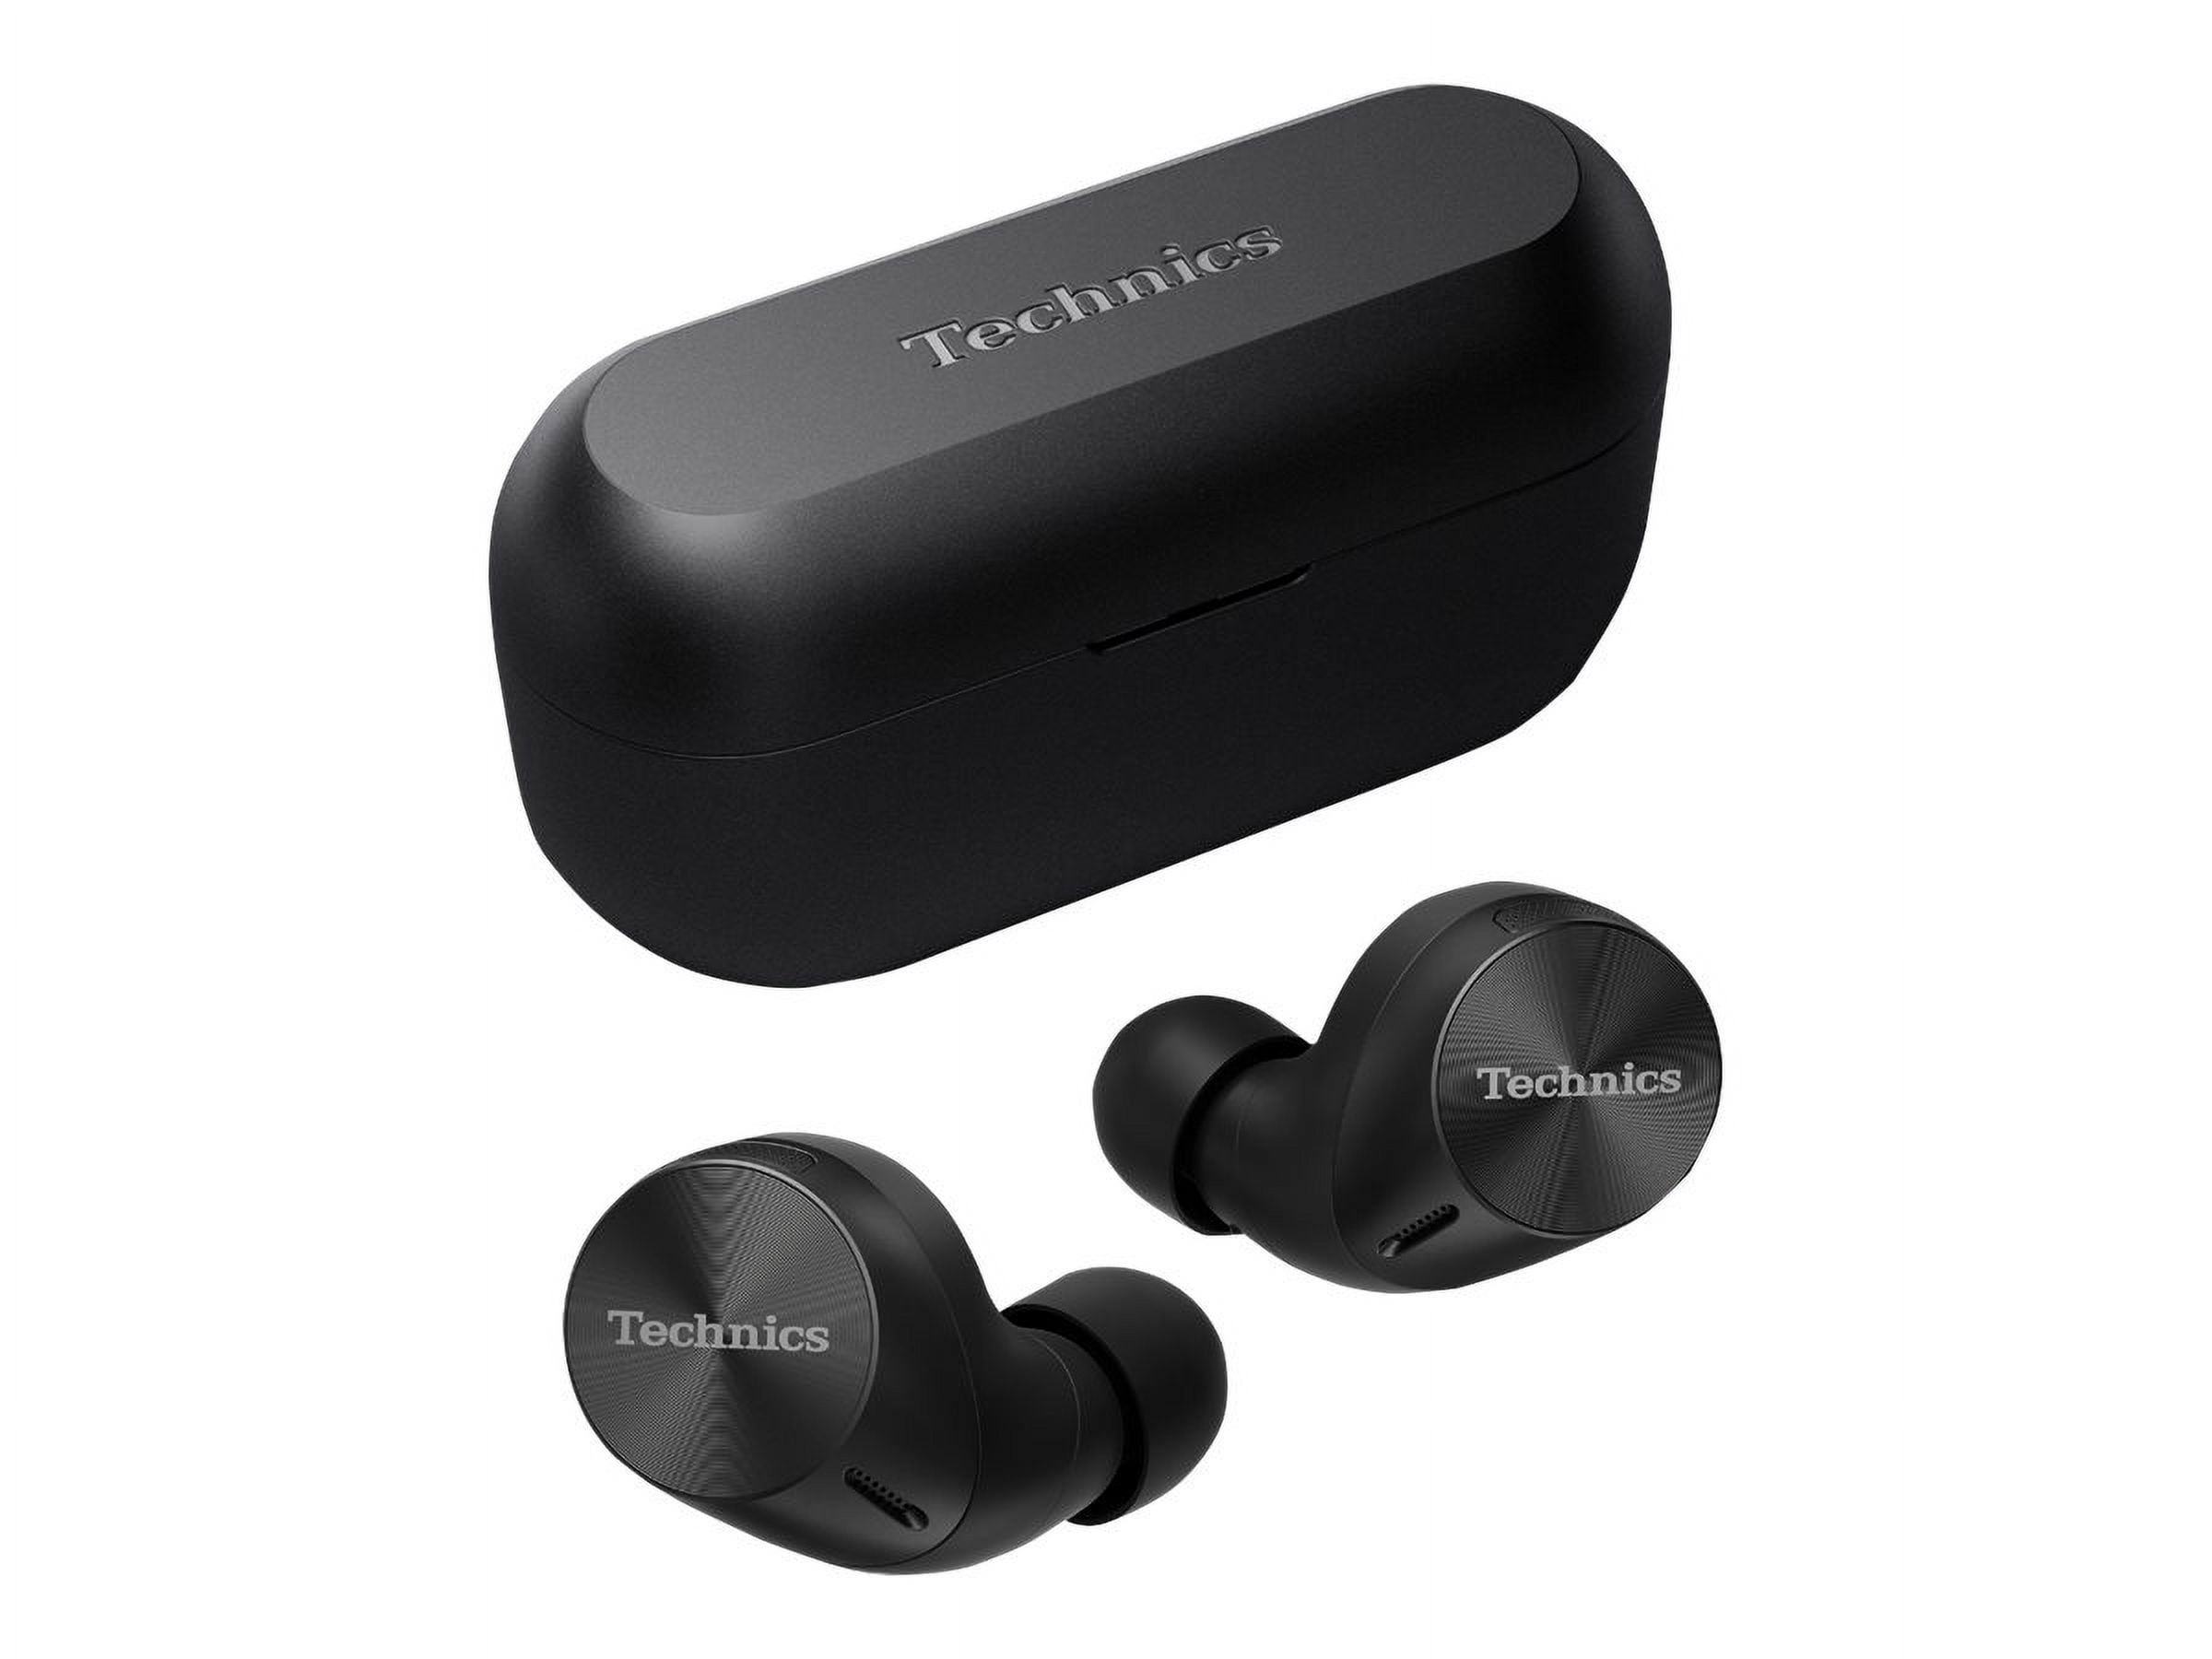 Technics EAH-AZ60M2-K HiFi True Wireless Multipoint Bluetooth Earbuds with  Noise Cancelling, 3 Device Multipoint Connectivity, Wireless Charging, 